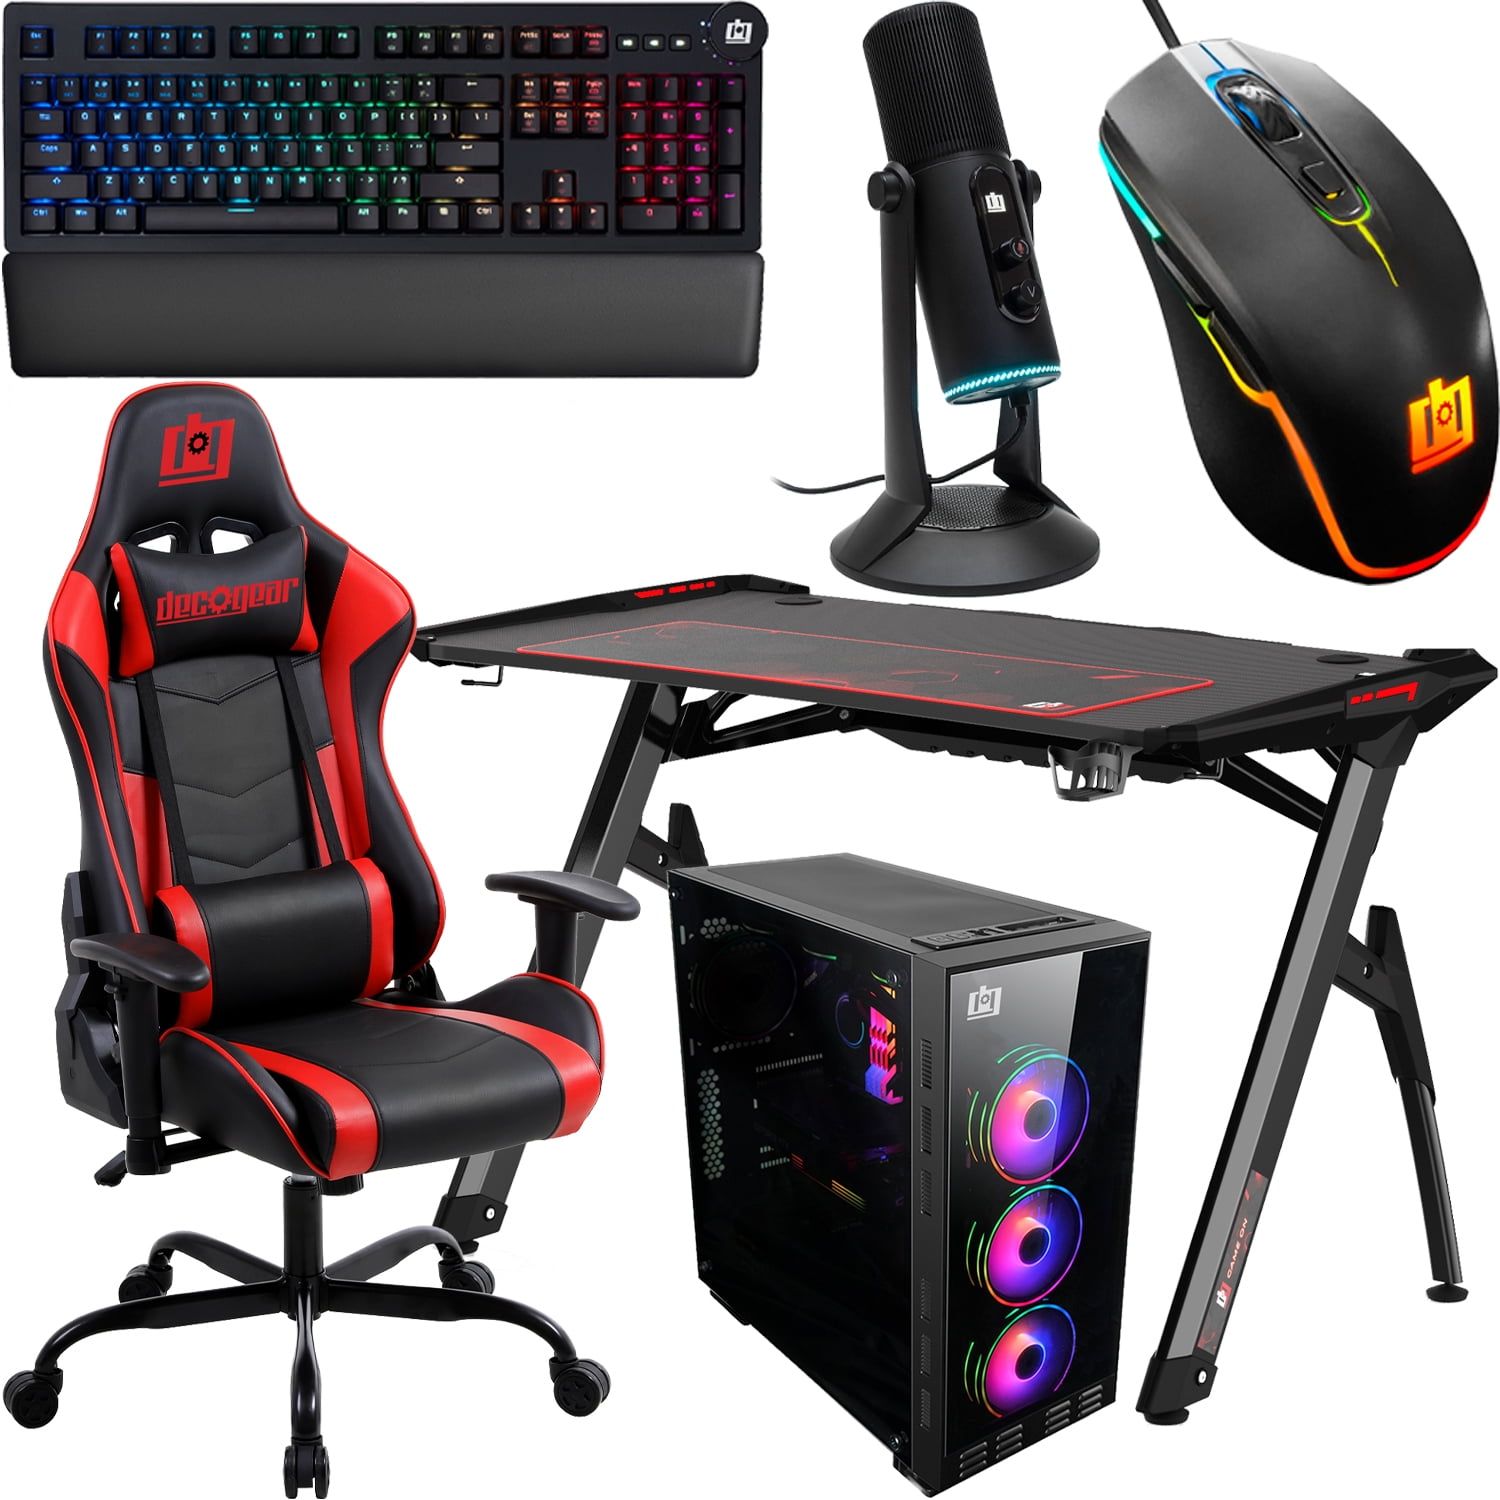 Deco Gear PC Gaming Starter Pack, Includes LED Gaming Desk, Gaming Chair,  Mid-Tower Tempered Glass PC Case, Cherry Red Mechanical Keyboard, Streaming